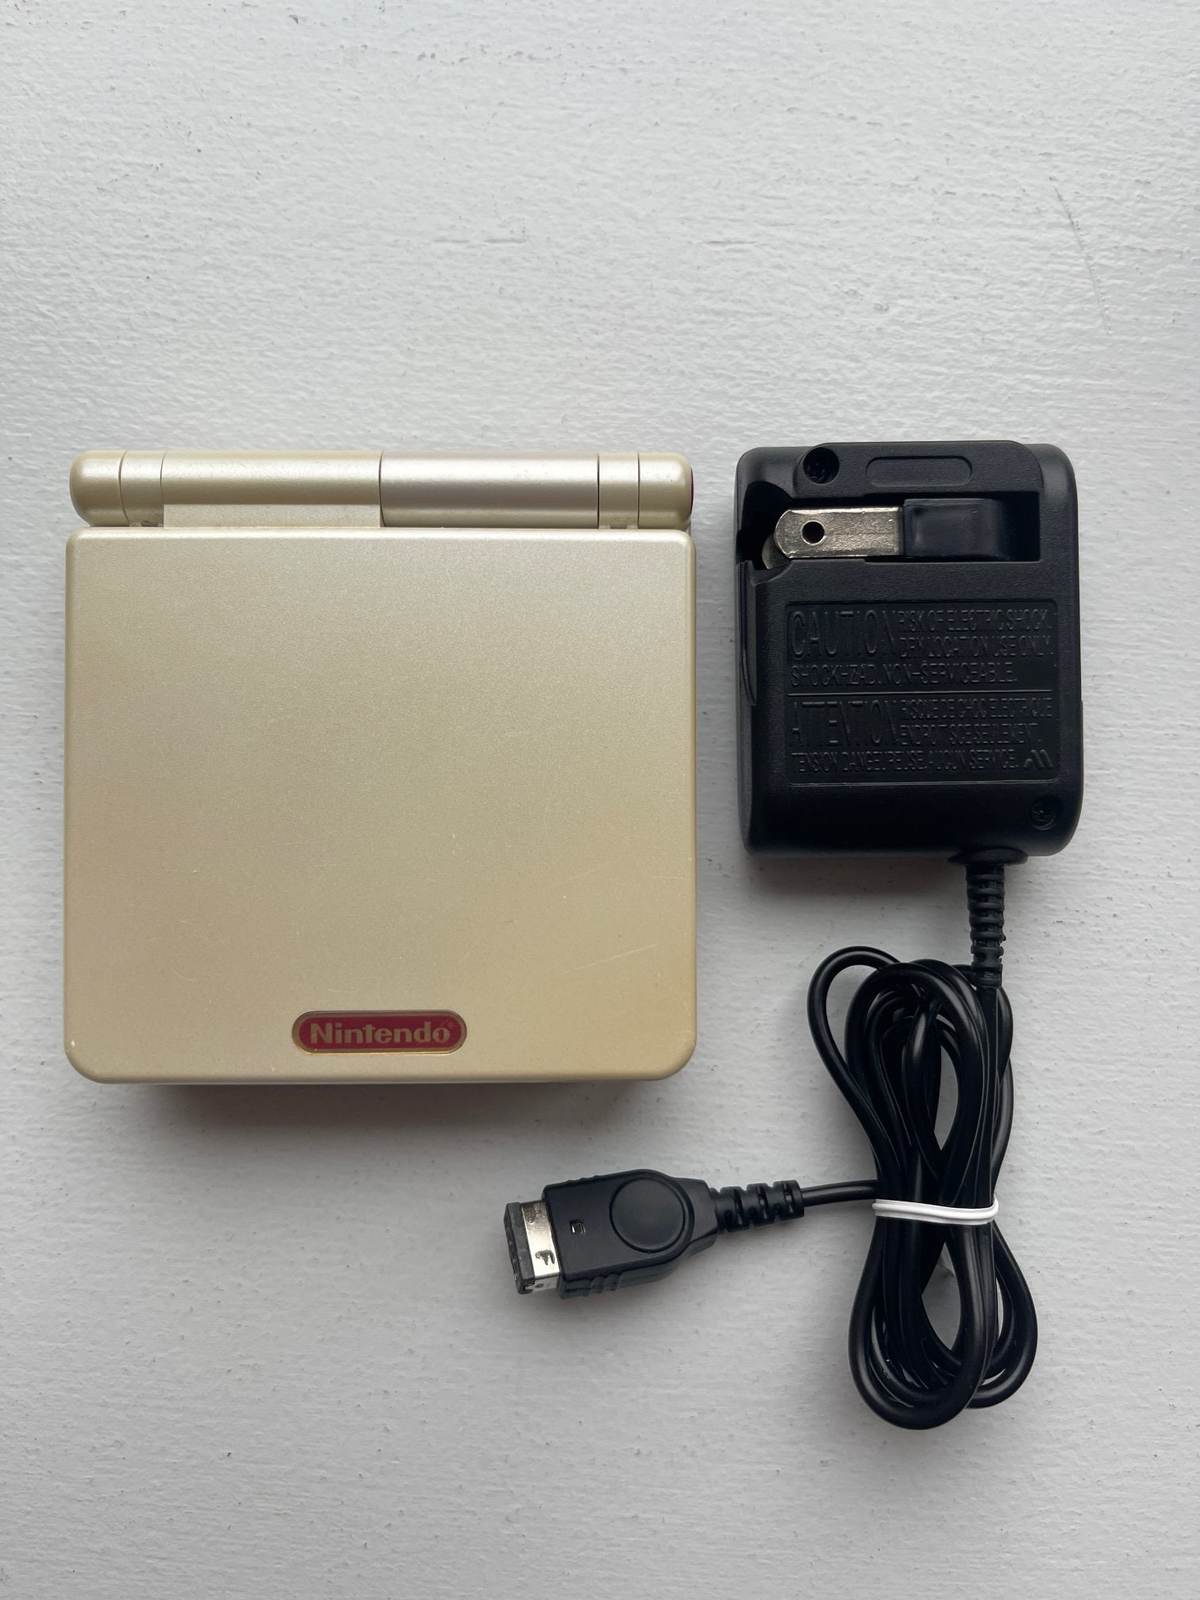 Primary image for Authentic Nintendo GameBoy Advance SP - Famicom Style - Rare